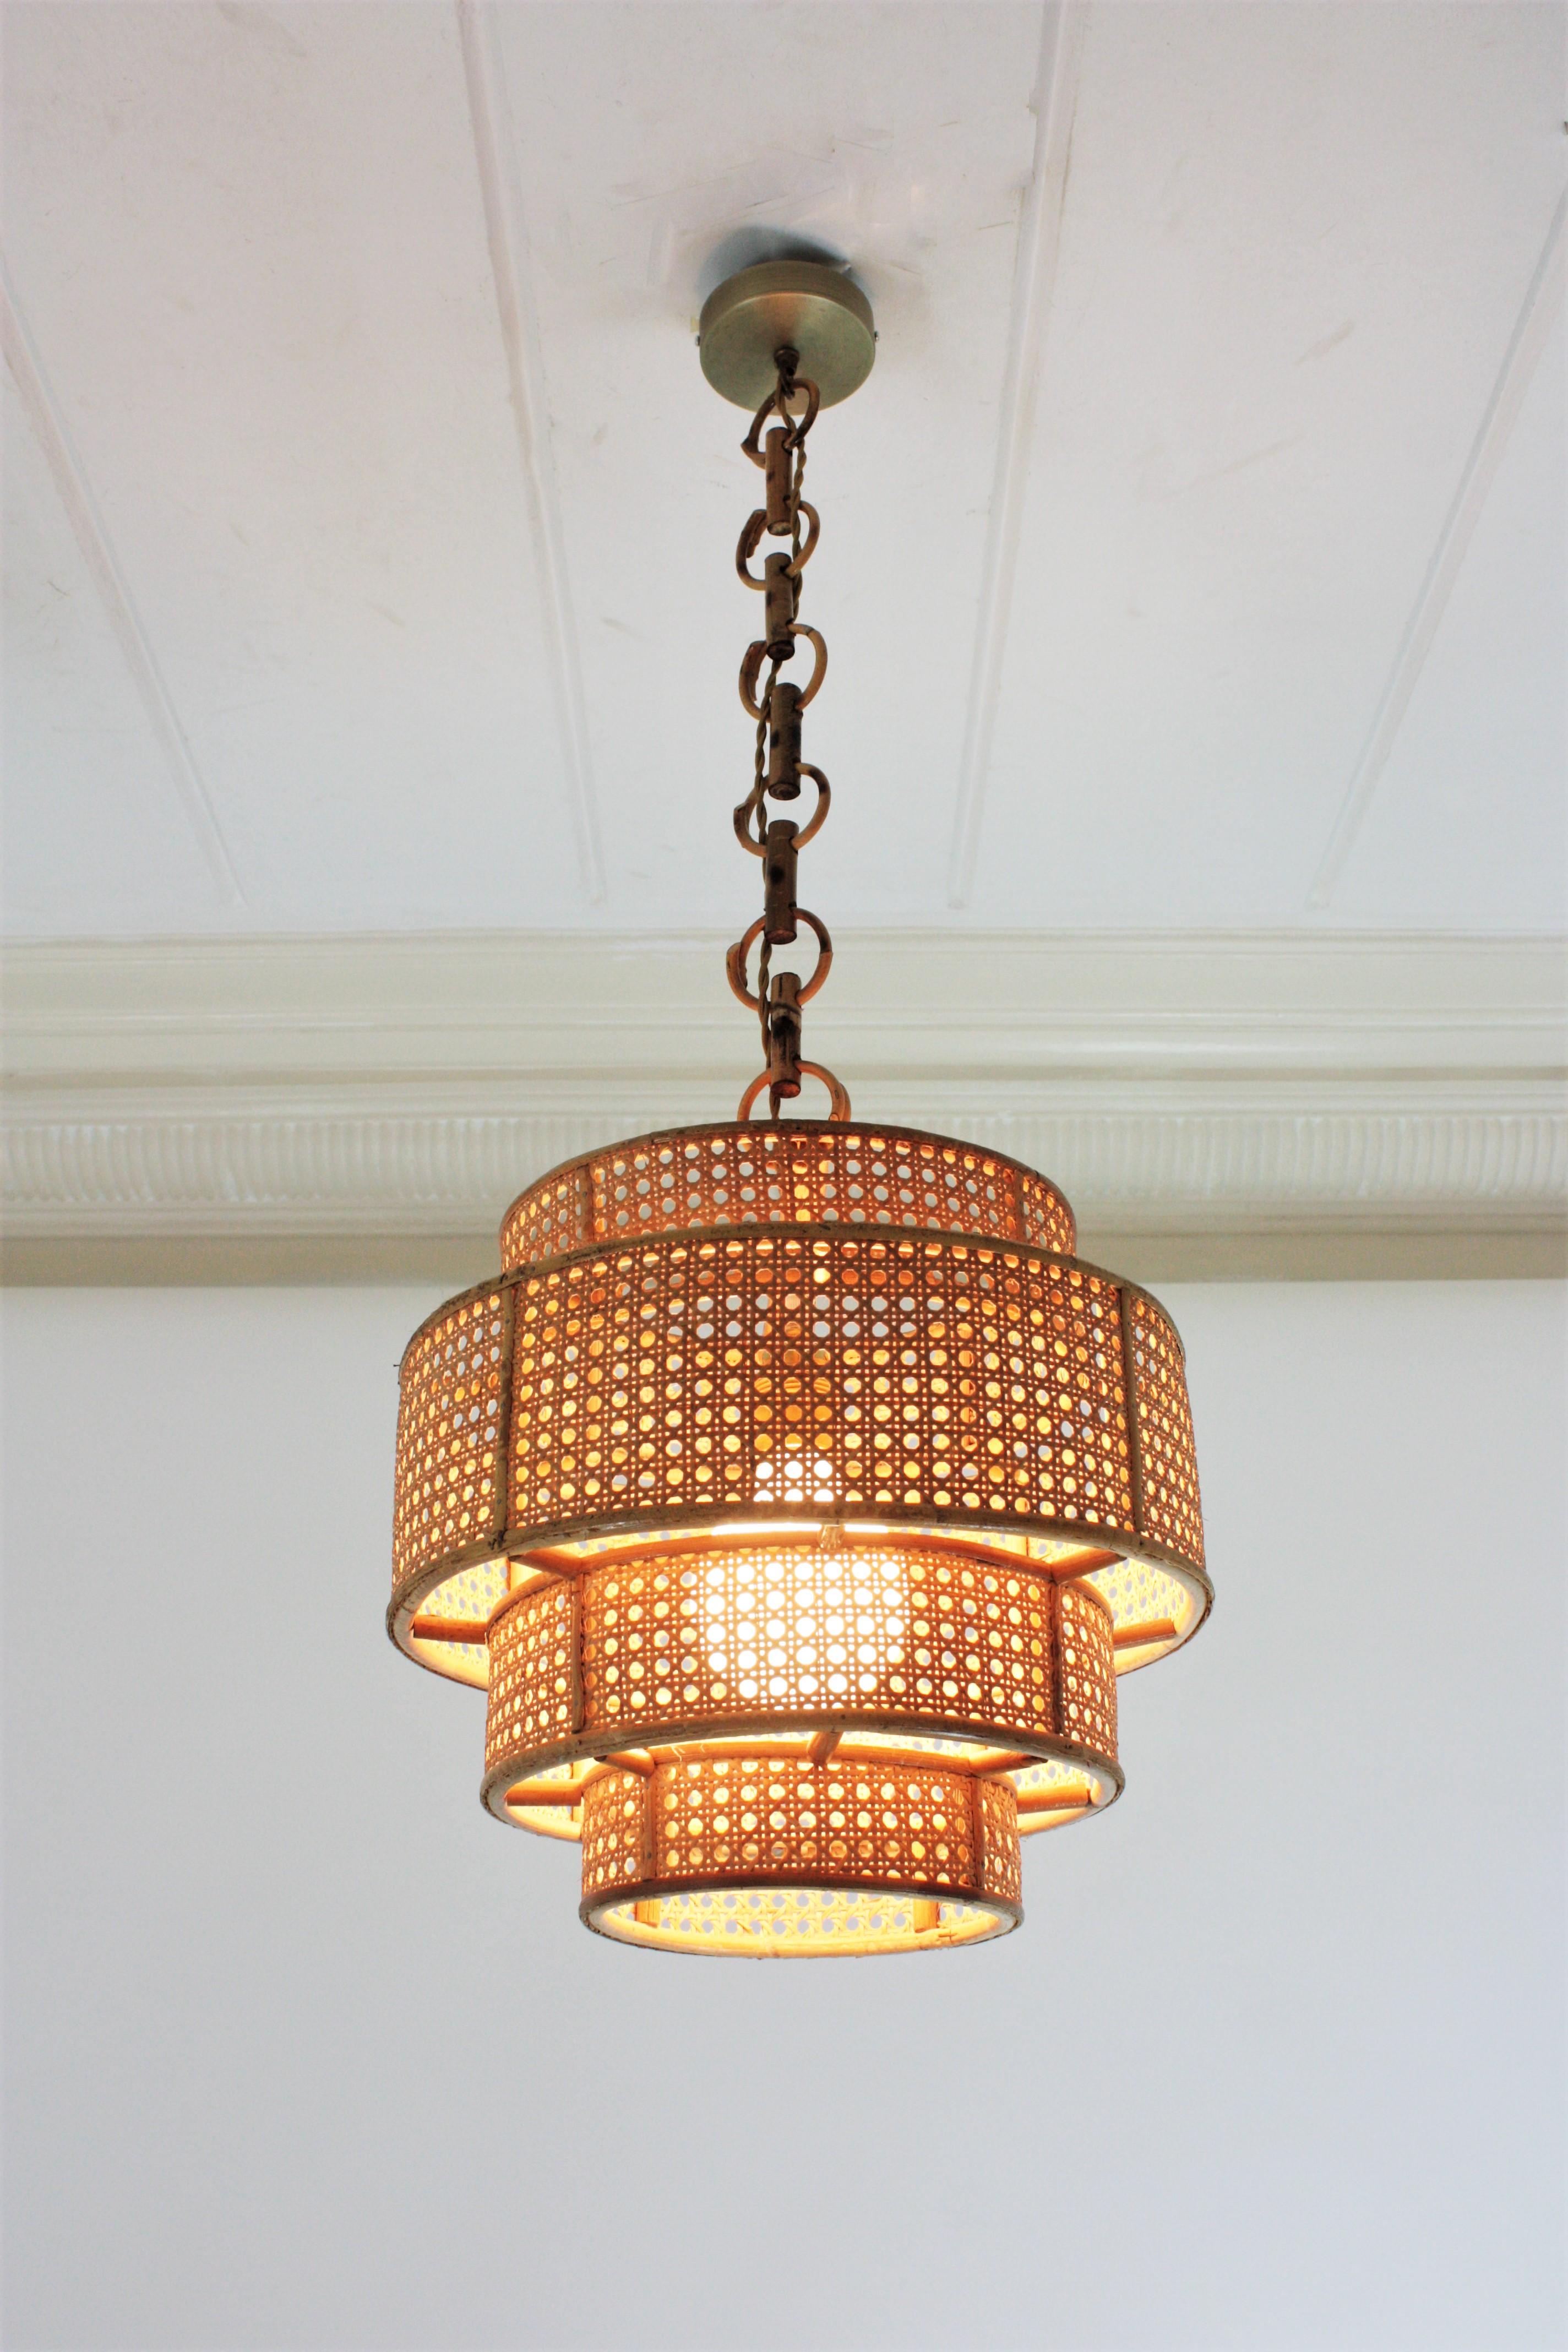 Italian  Rattan Wicker Weave Concentric Cylinder Pendant Hanging Light, 1960s For Sale